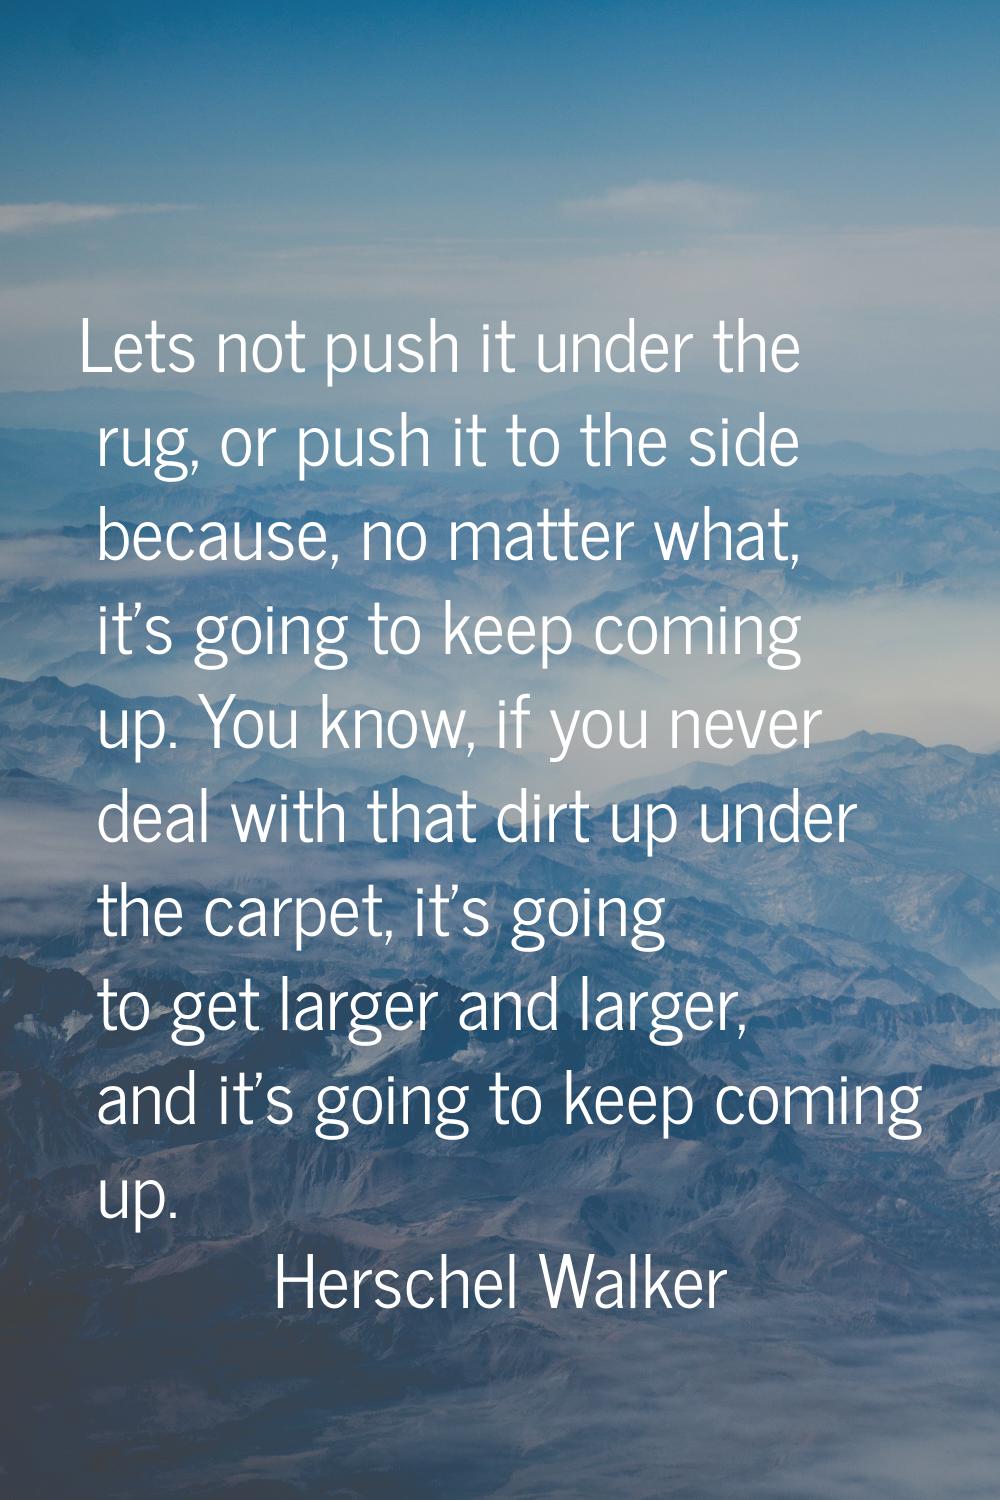 Lets not push it under the rug, or push it to the side because, no matter what, it's going to keep 